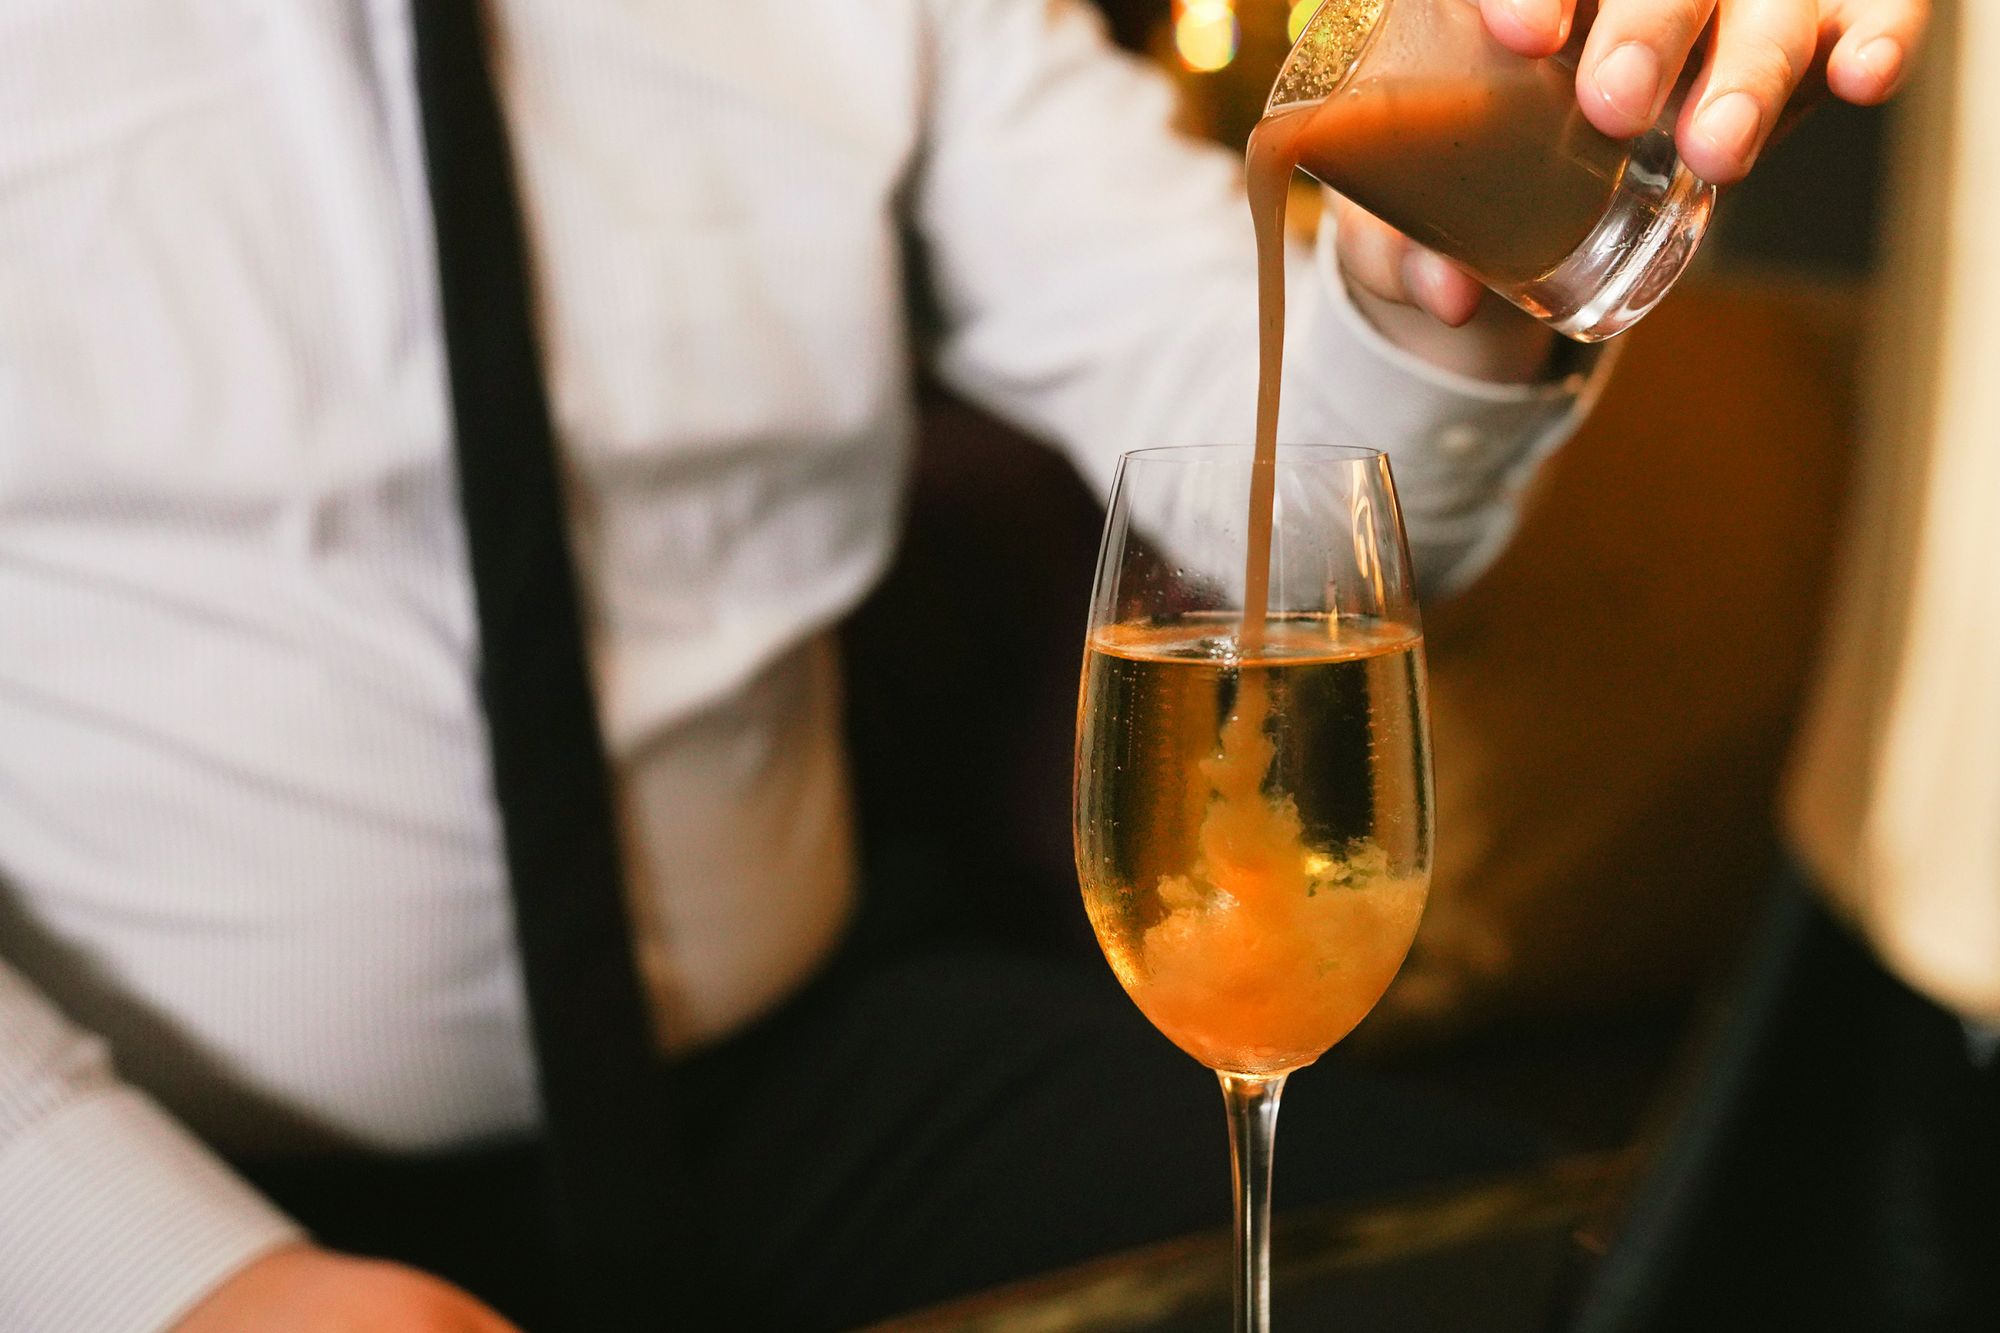 Champagne Bar Returns as New Destination for Champagne Lovers with Massive Collection of Bubblies and Champagne-based Cocktails